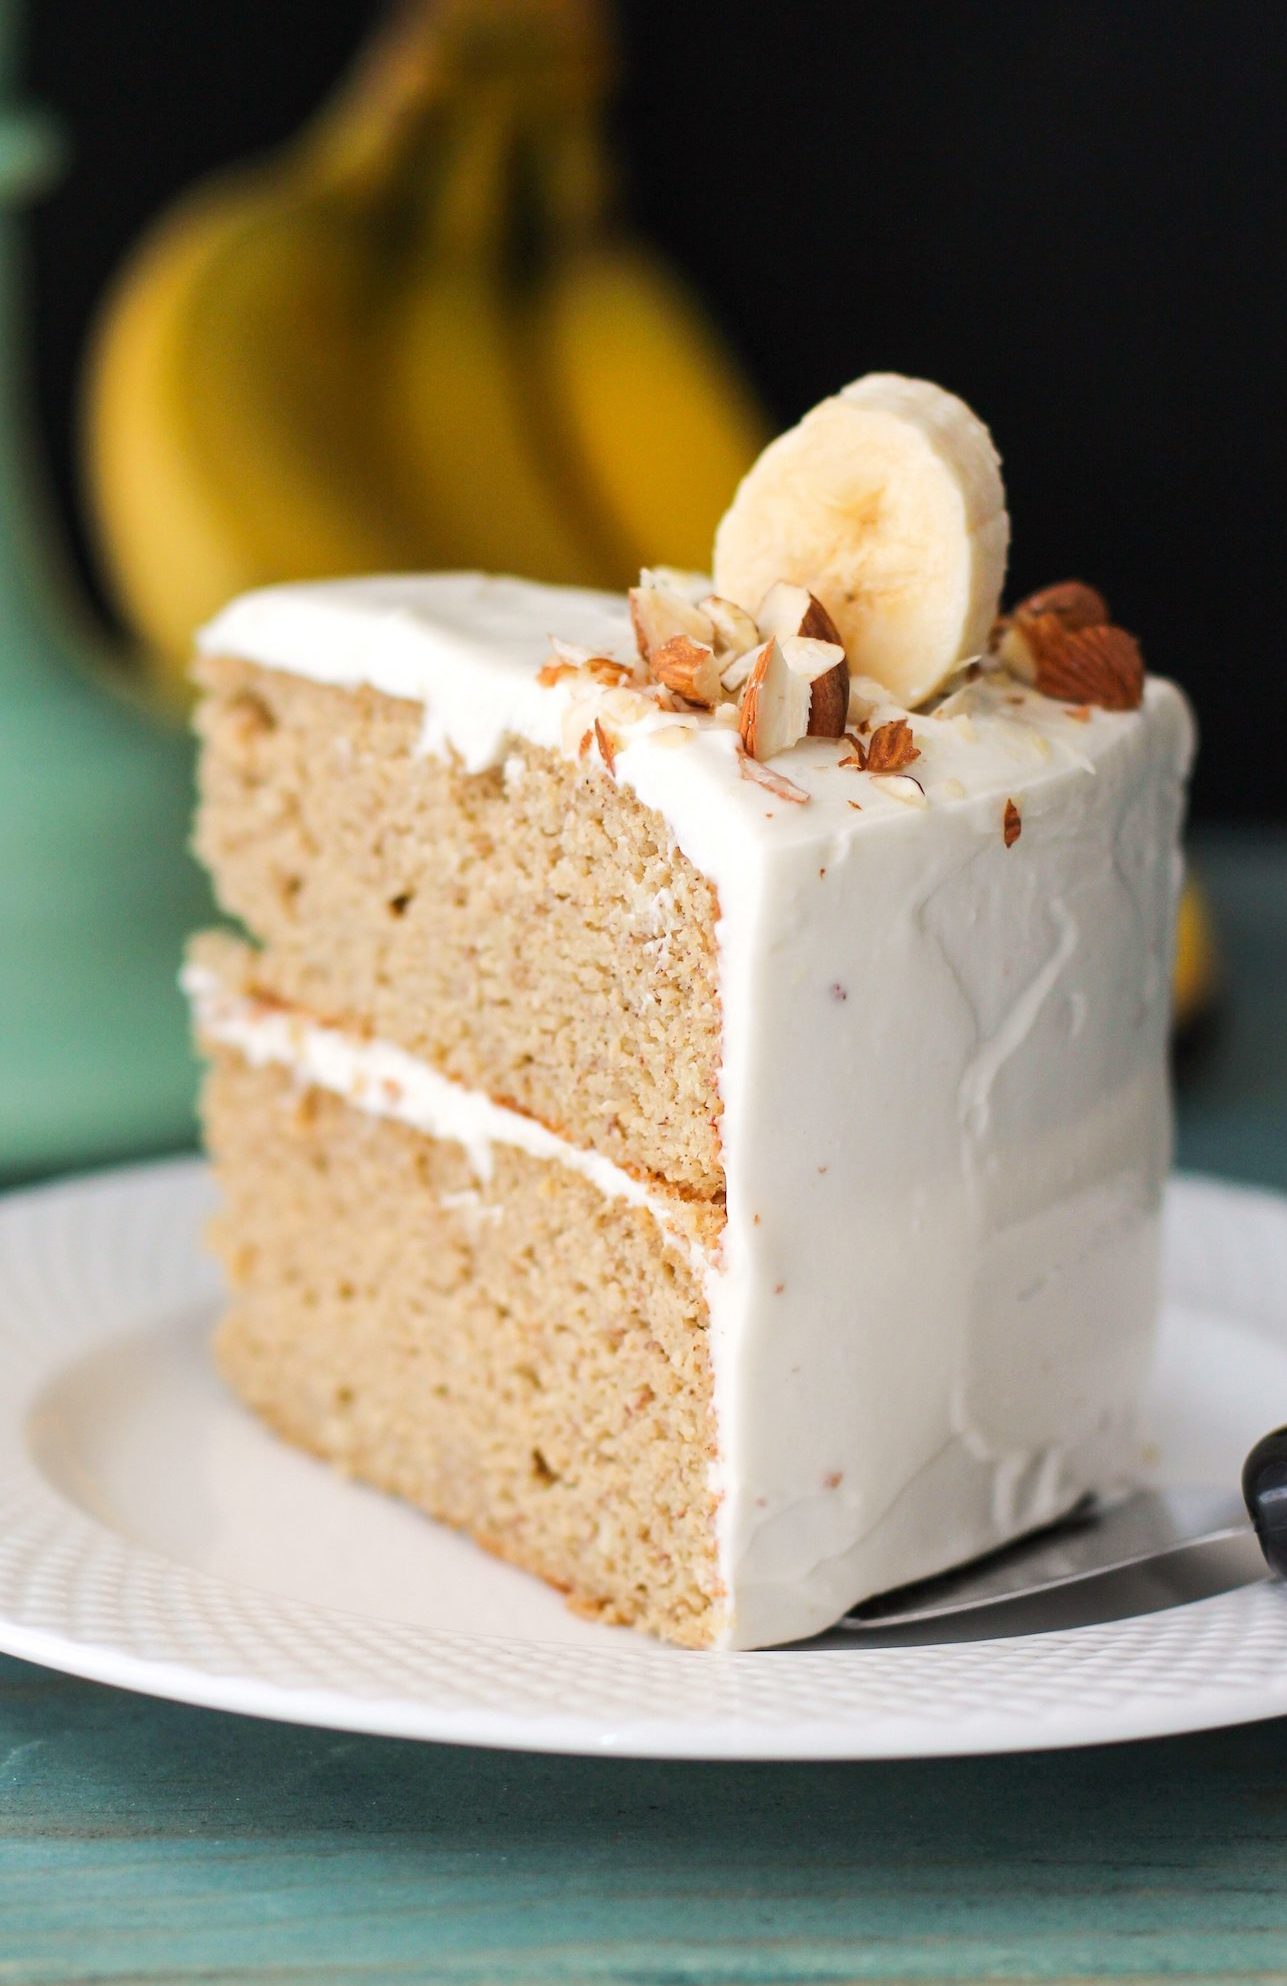 Gluten Free Healthy Banana Cake with Cream Cheese Frosting Recipe